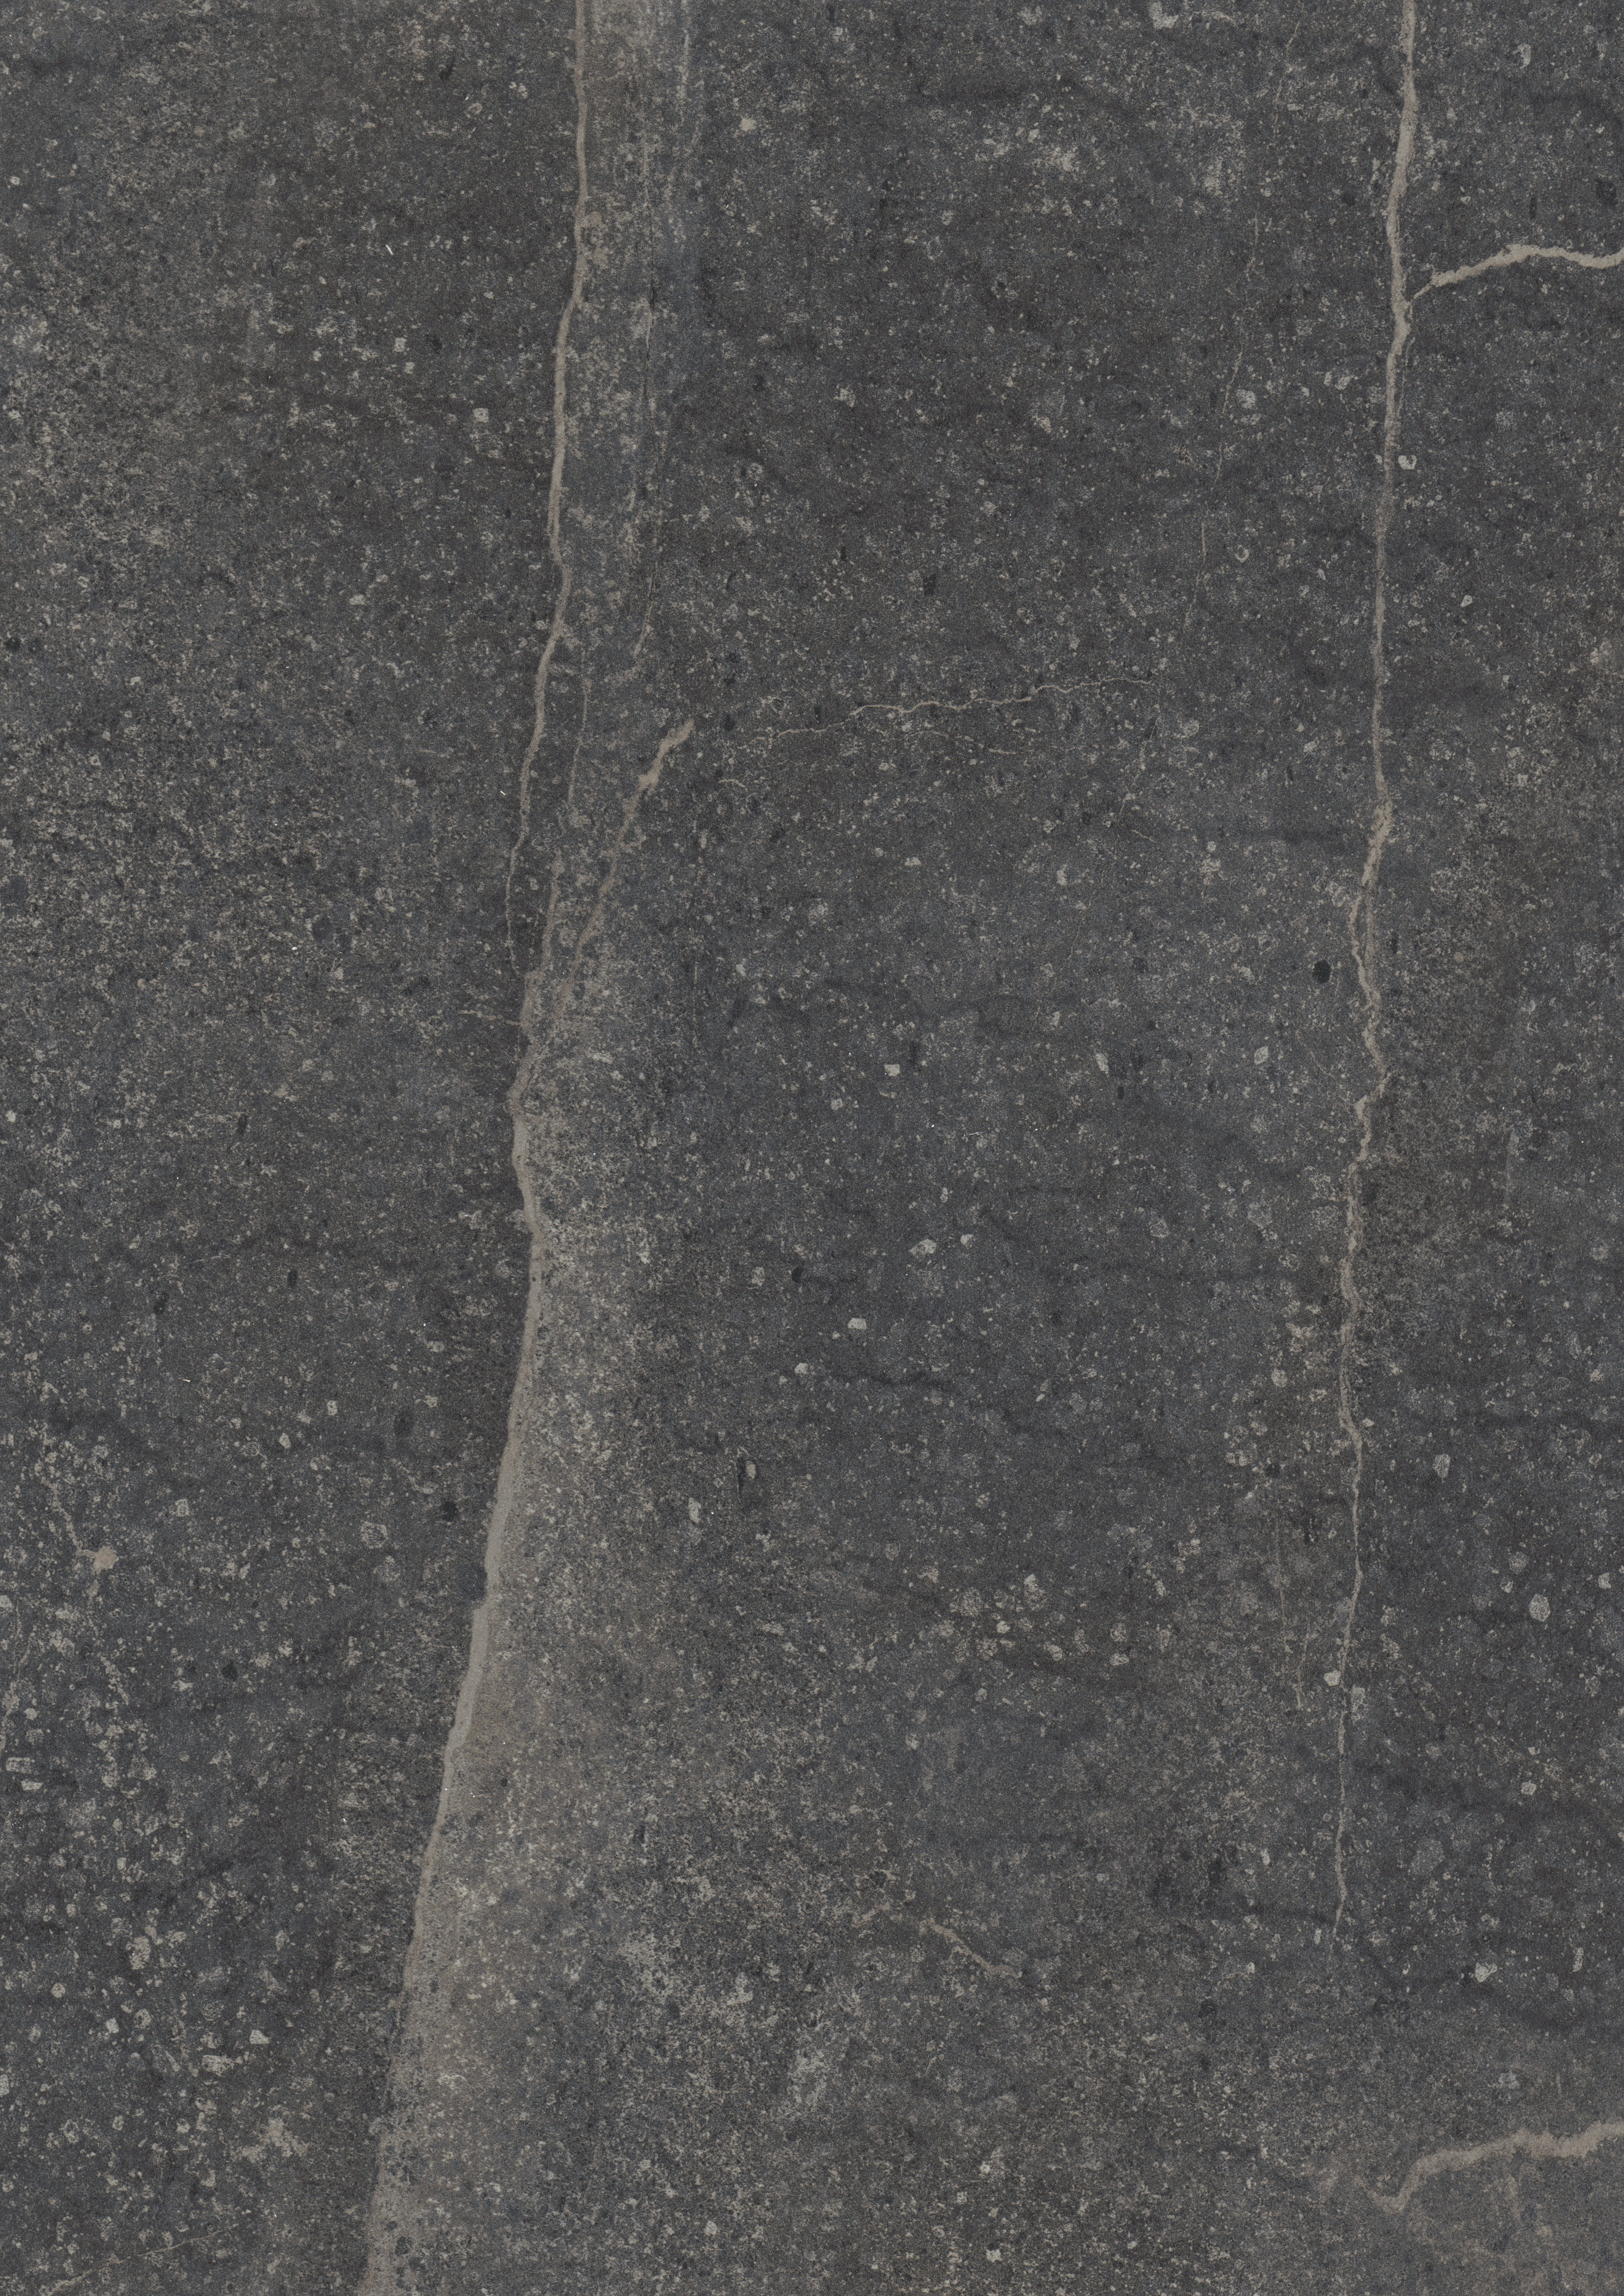 Anthracite Candela Marble F244 ST76